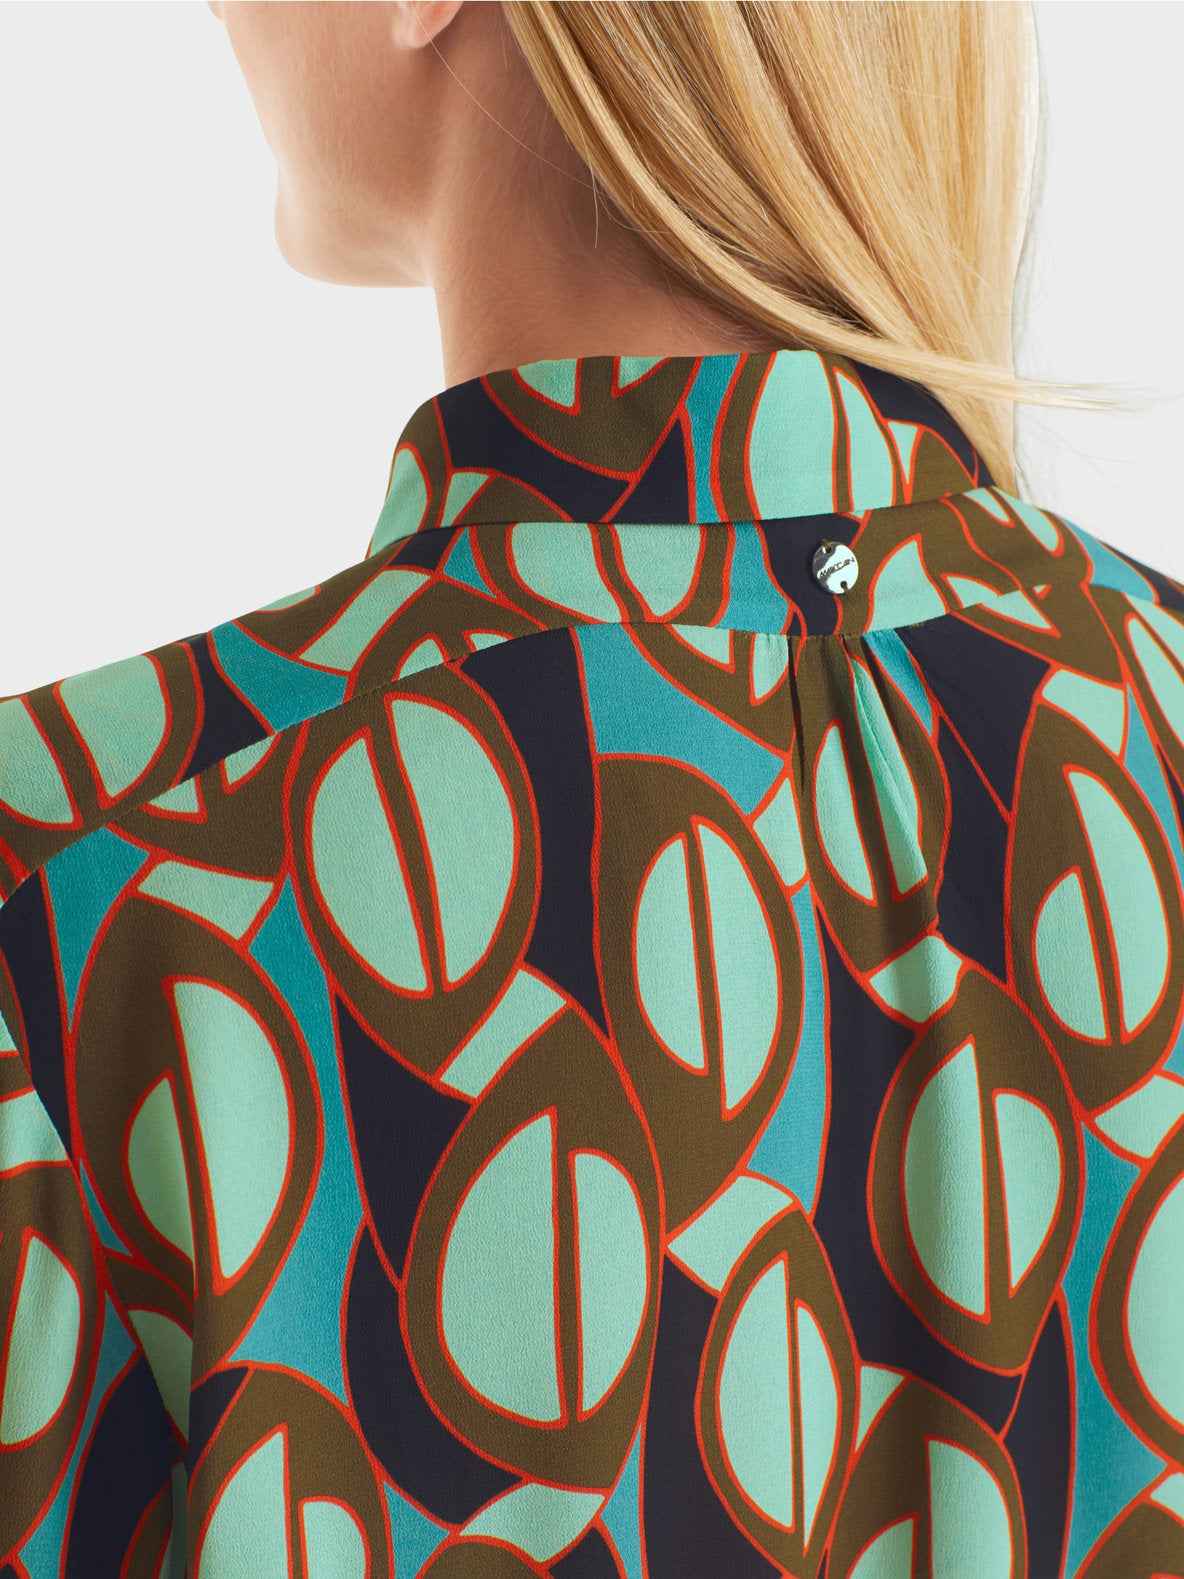 Colourful Patterned Shirt Blouse_WC 51.04 W04_562_04